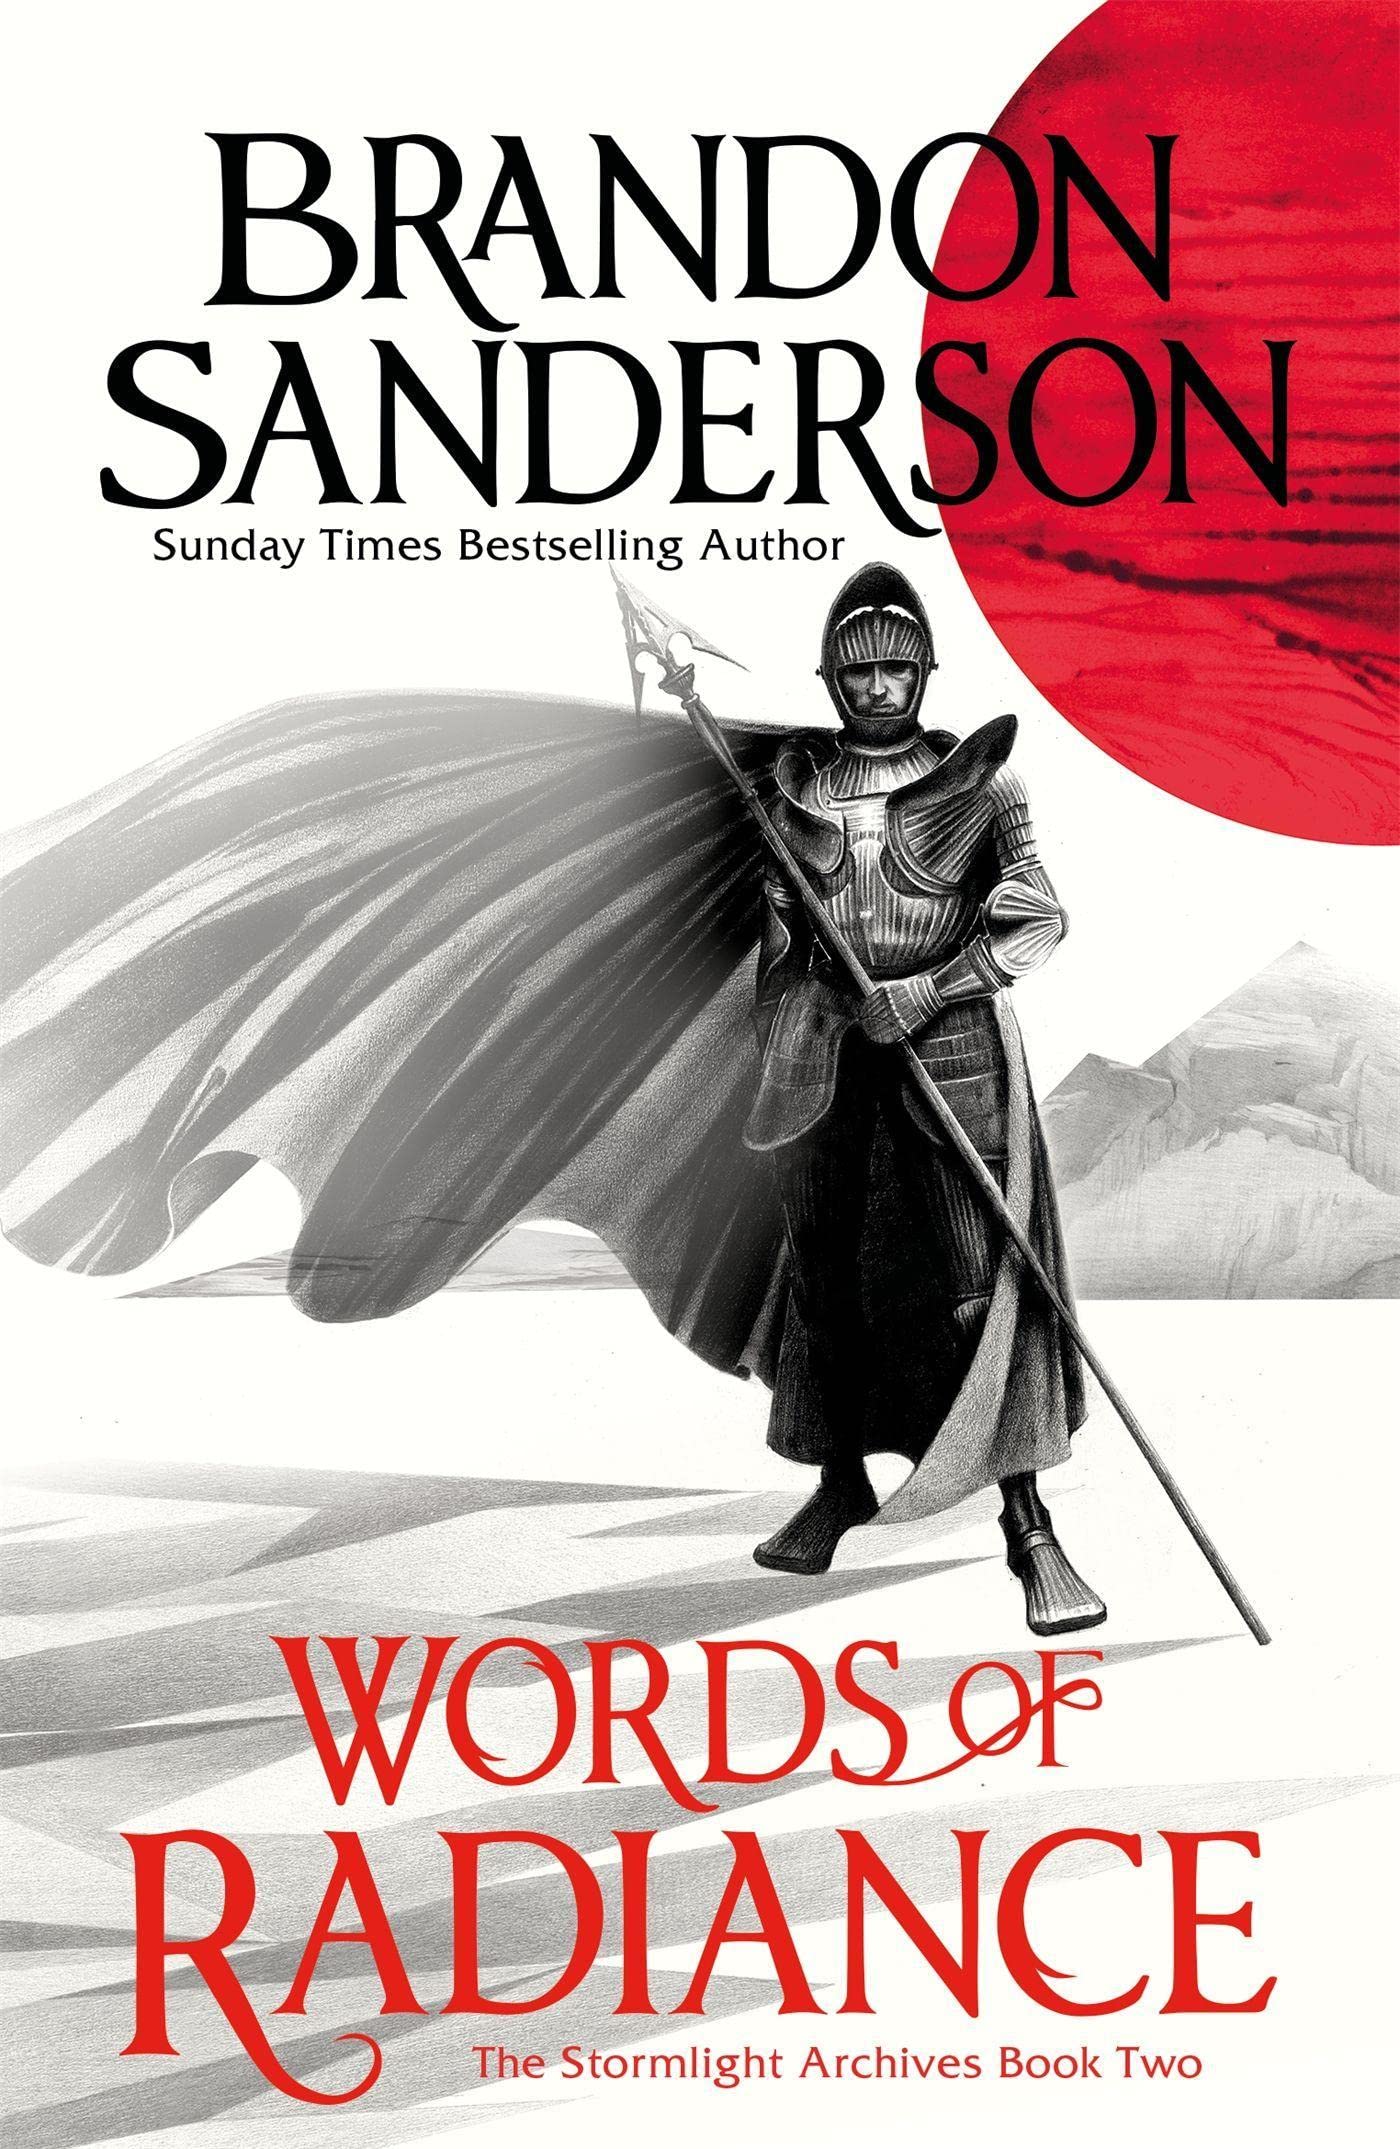 Words of Radiance: Part One - The Stormlight Archive Book Two